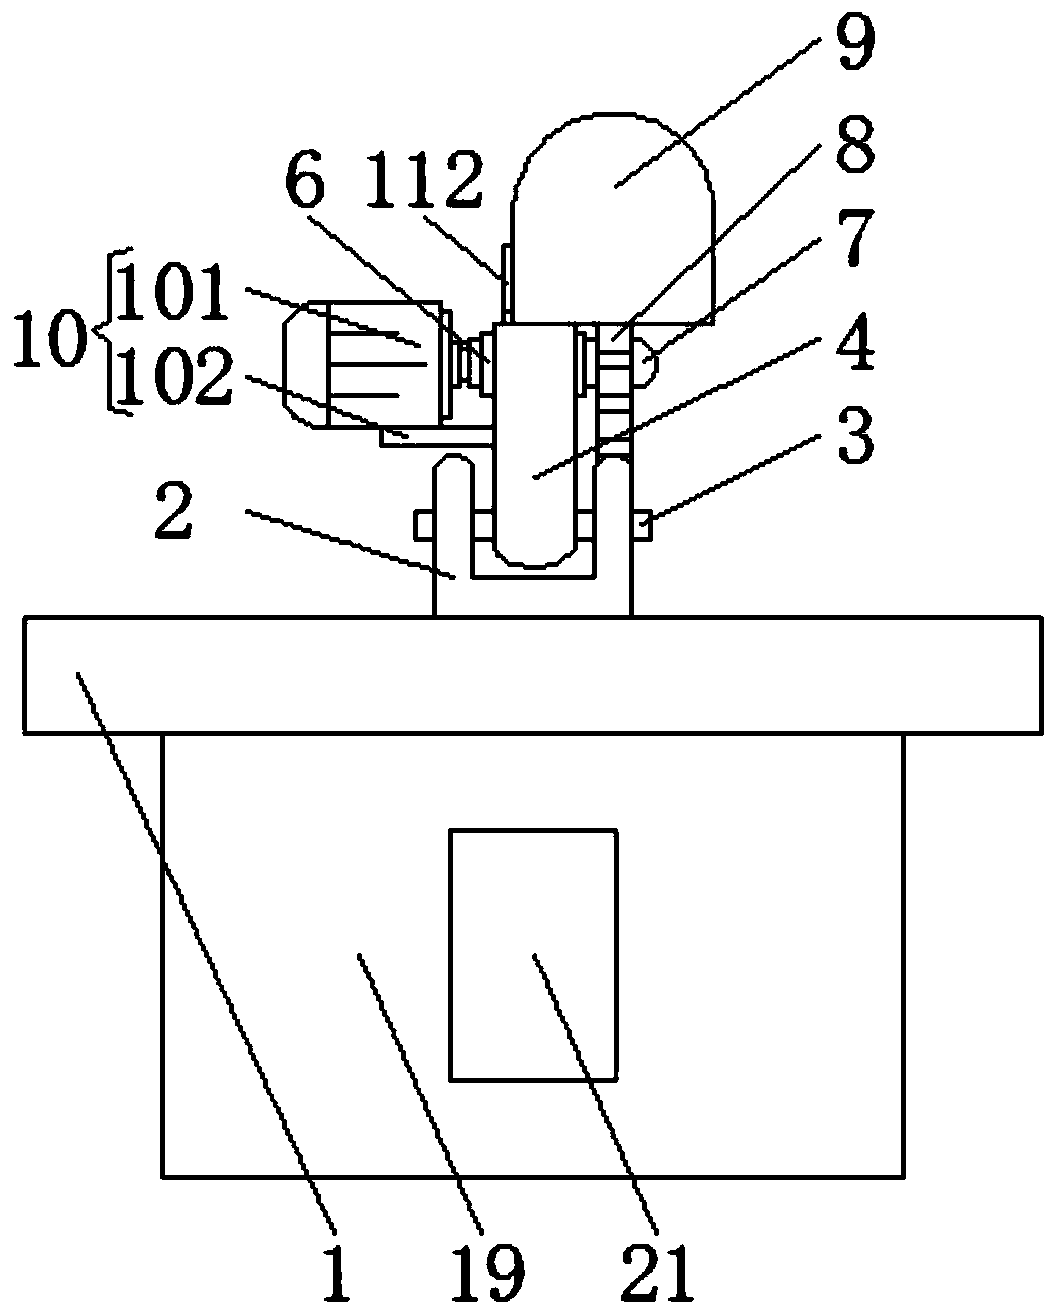 Environment-friendly wood cutting device for fabricated building